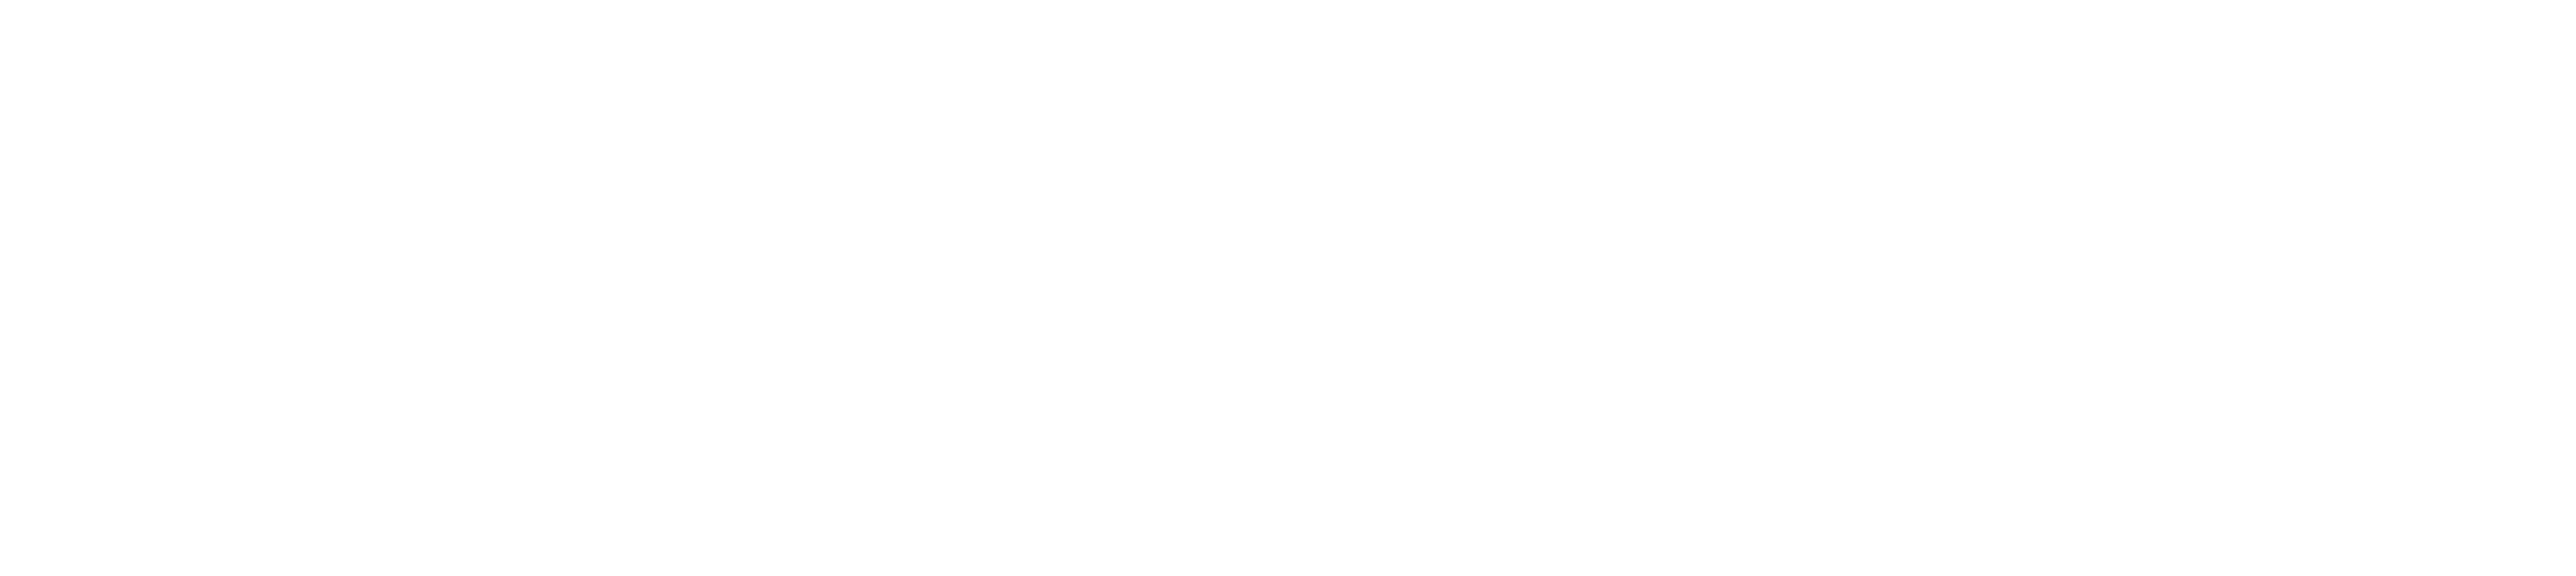 smart-collectors_weiss_RGB